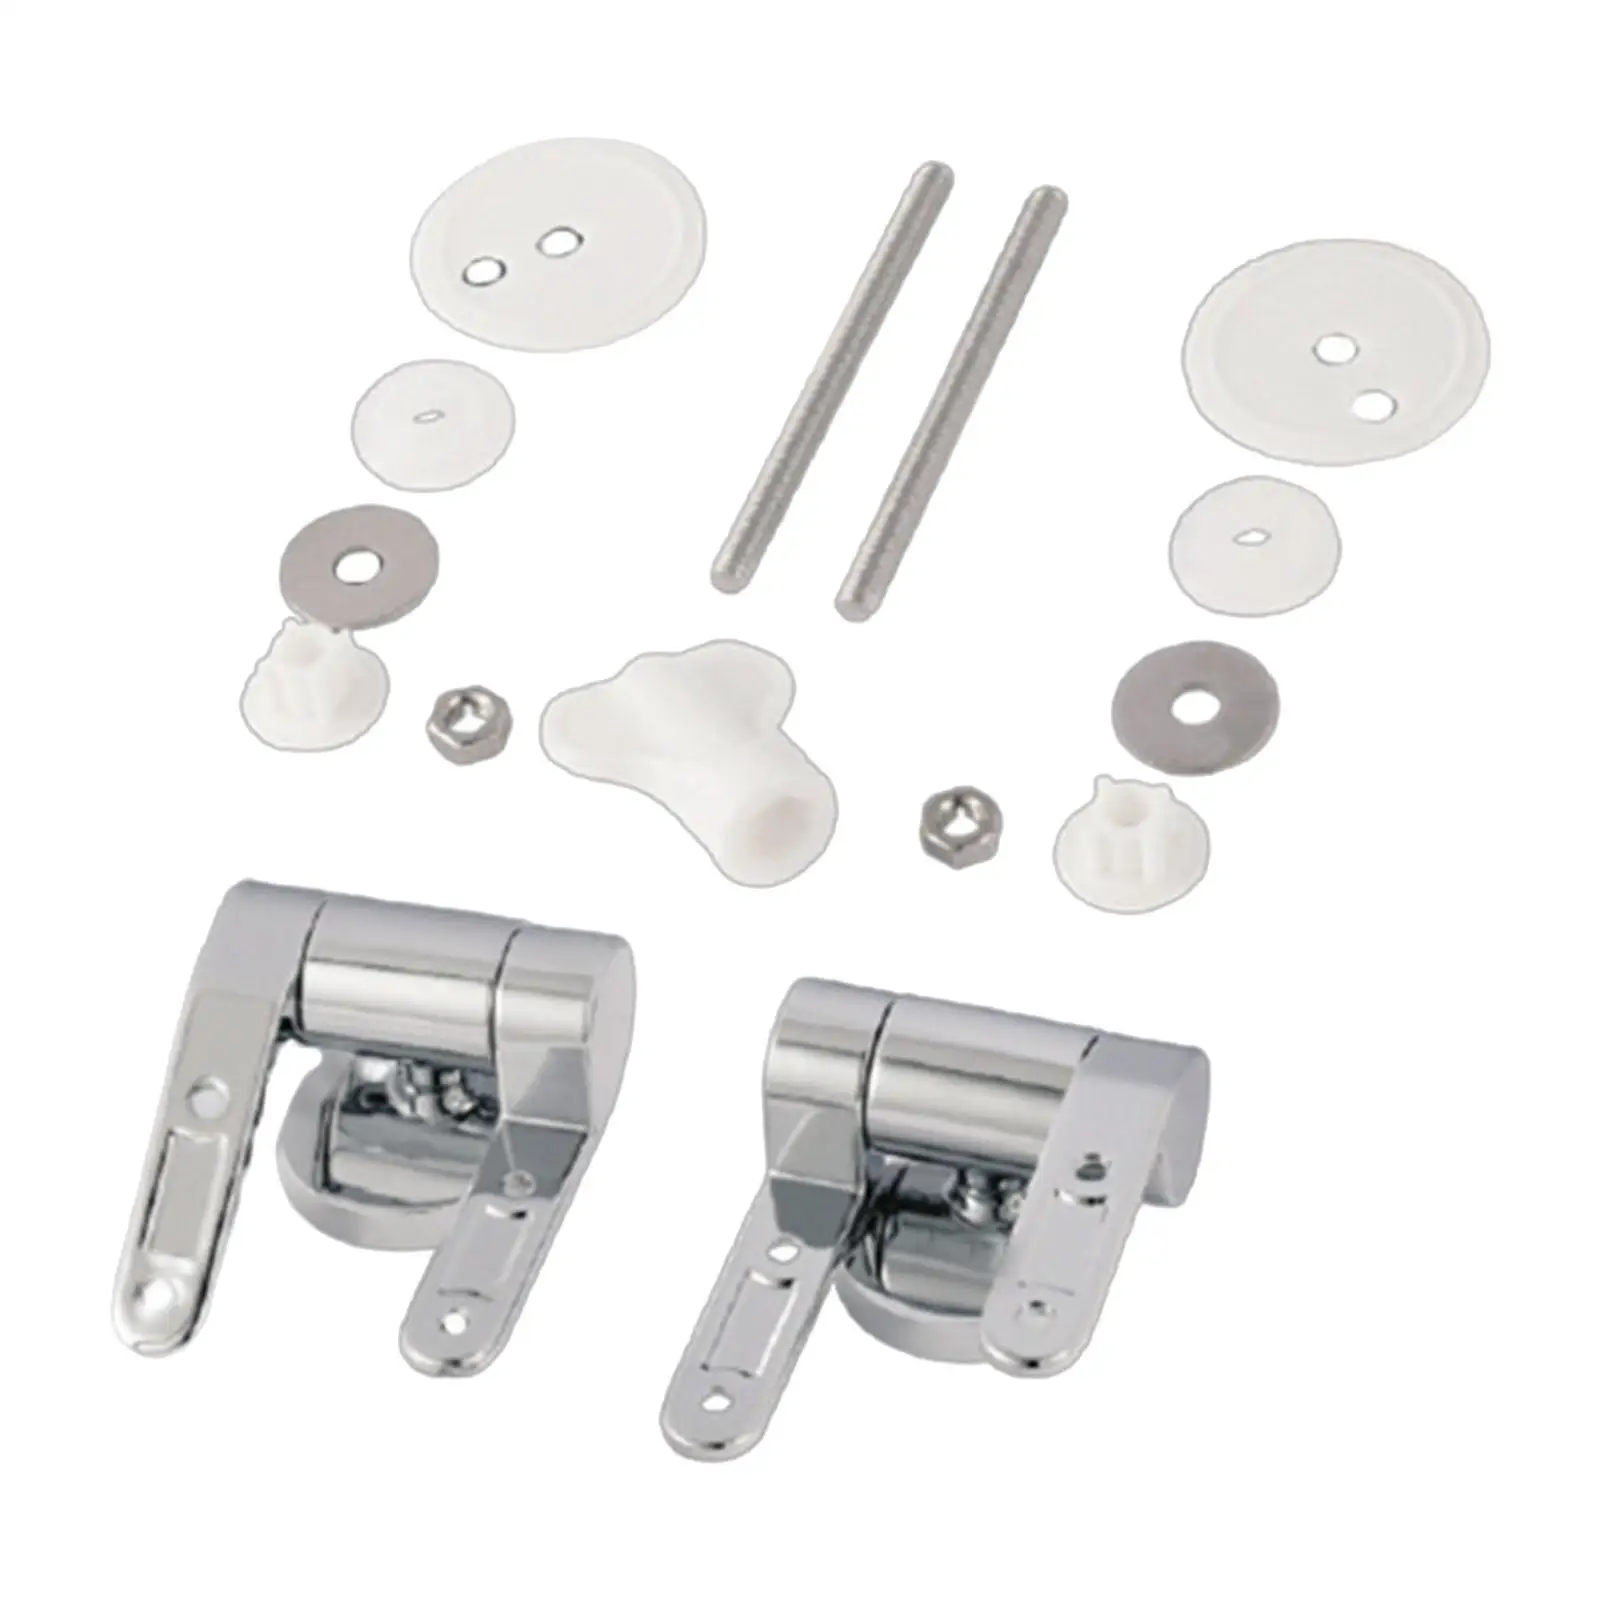 Toilet Seat Hinge Fixtures Mounting Fixed Joint Fixing Bracket for Flipping Rice Cooker Lids Washing Machine Telescopic Kitchen